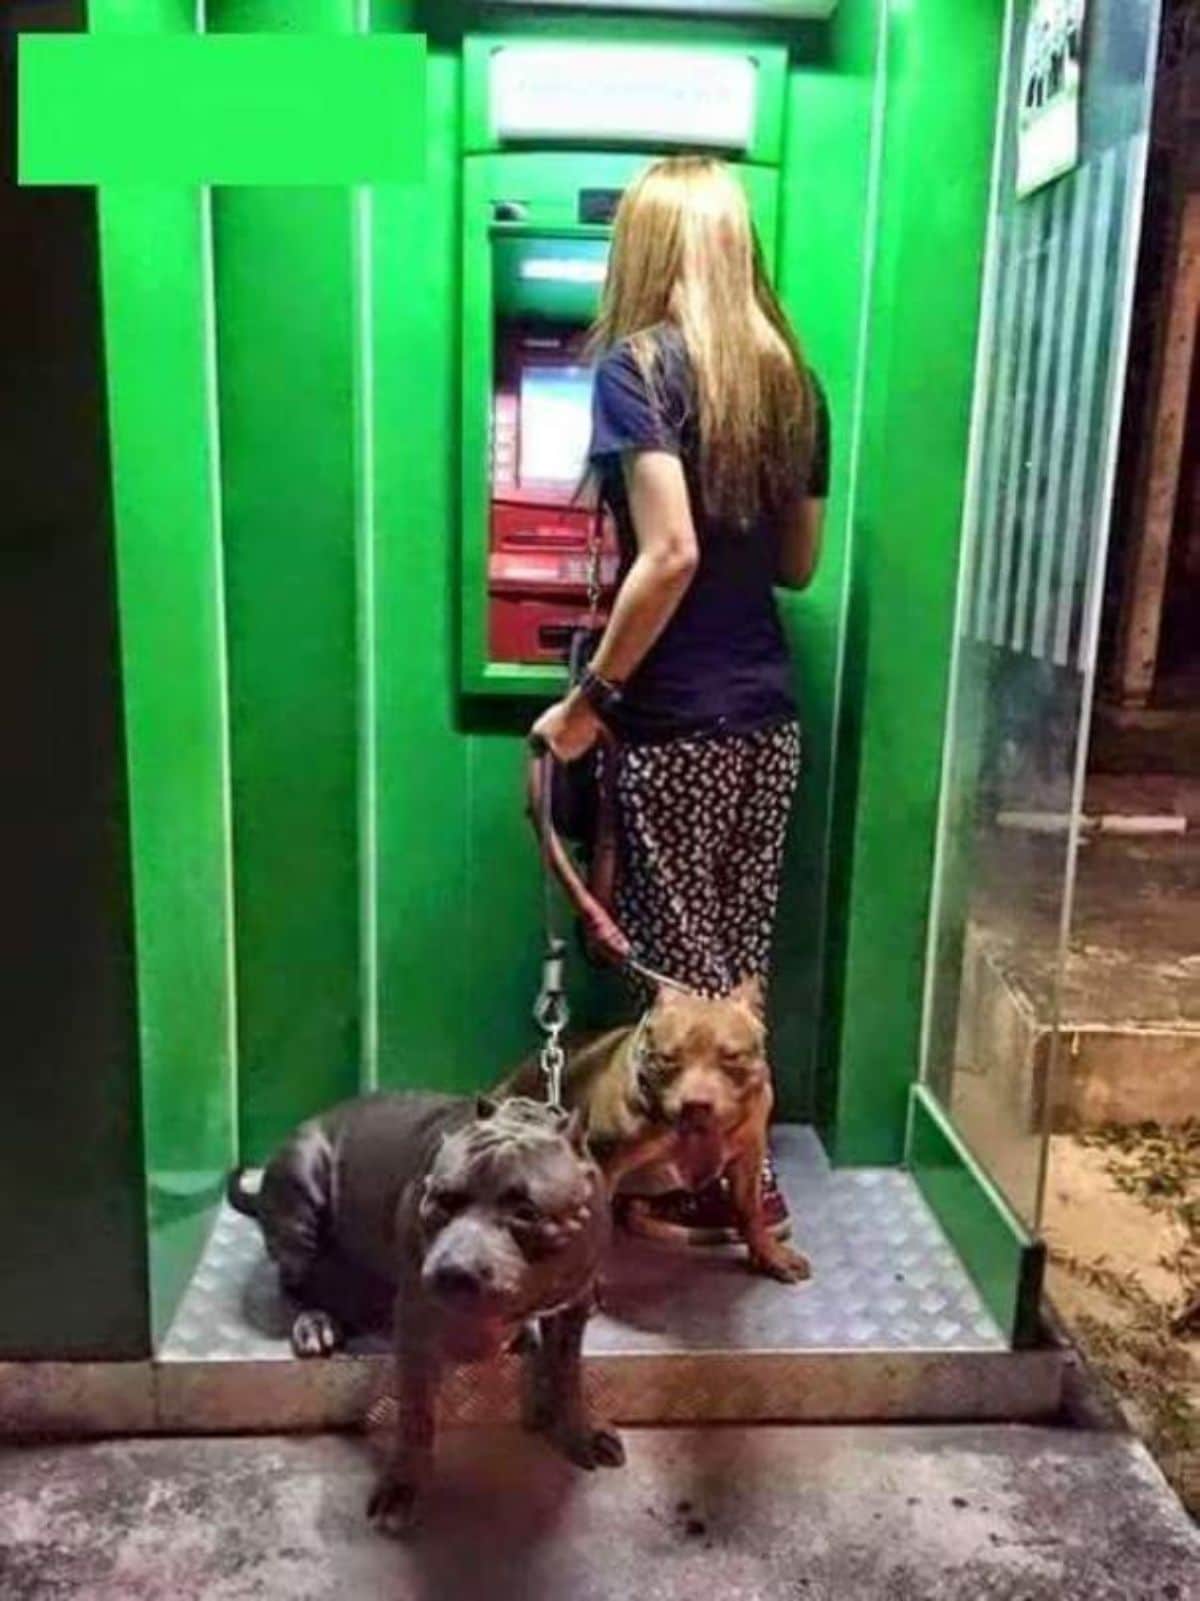 two pitbulls, one dark brown and the other light brown, with a woman at a green atm